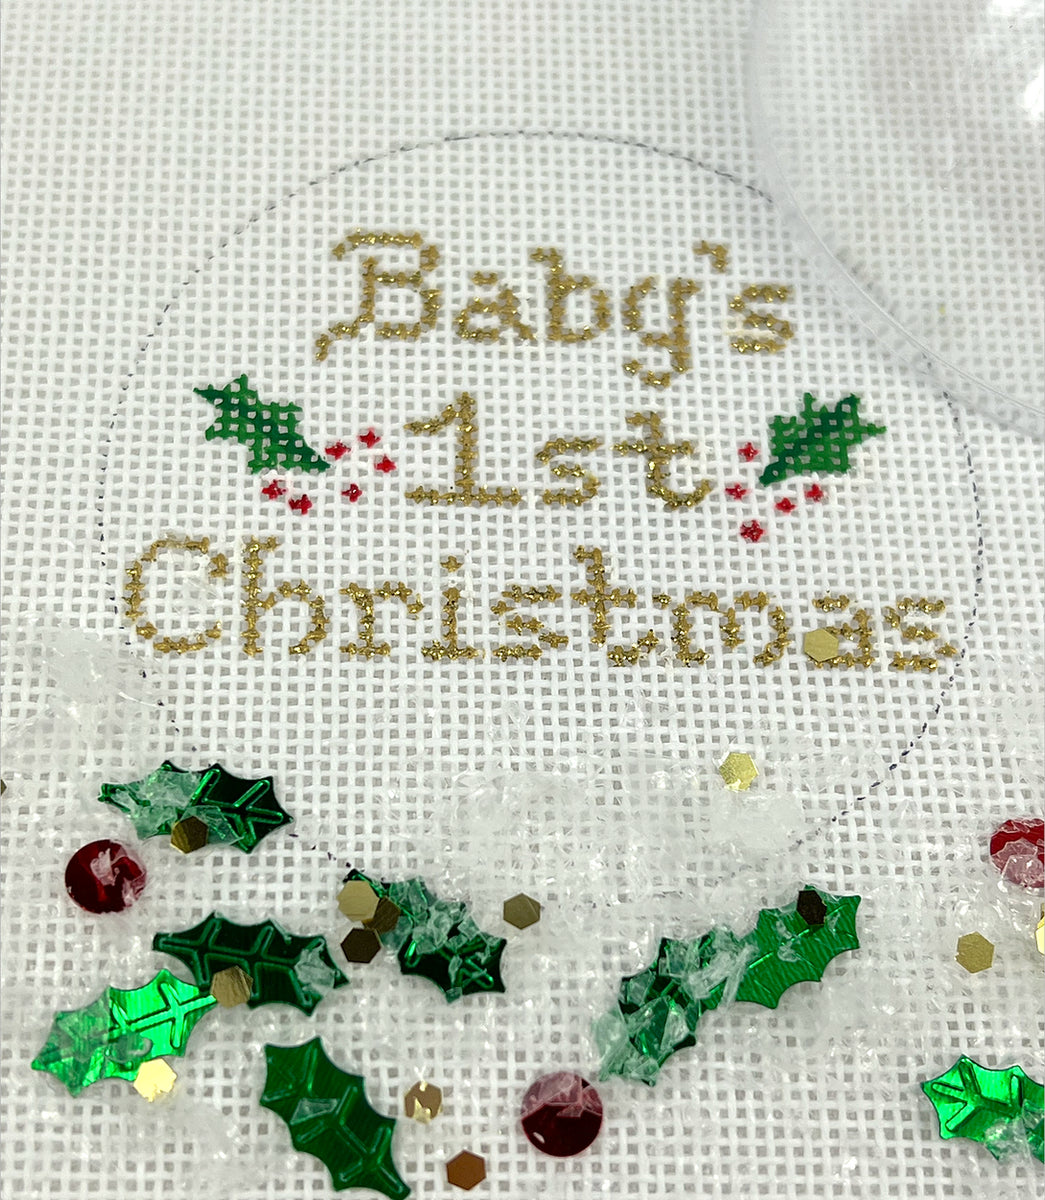 Baby’s First Christmas Ornament - Counted Cross Stitch Kit - Needlemagic NMI